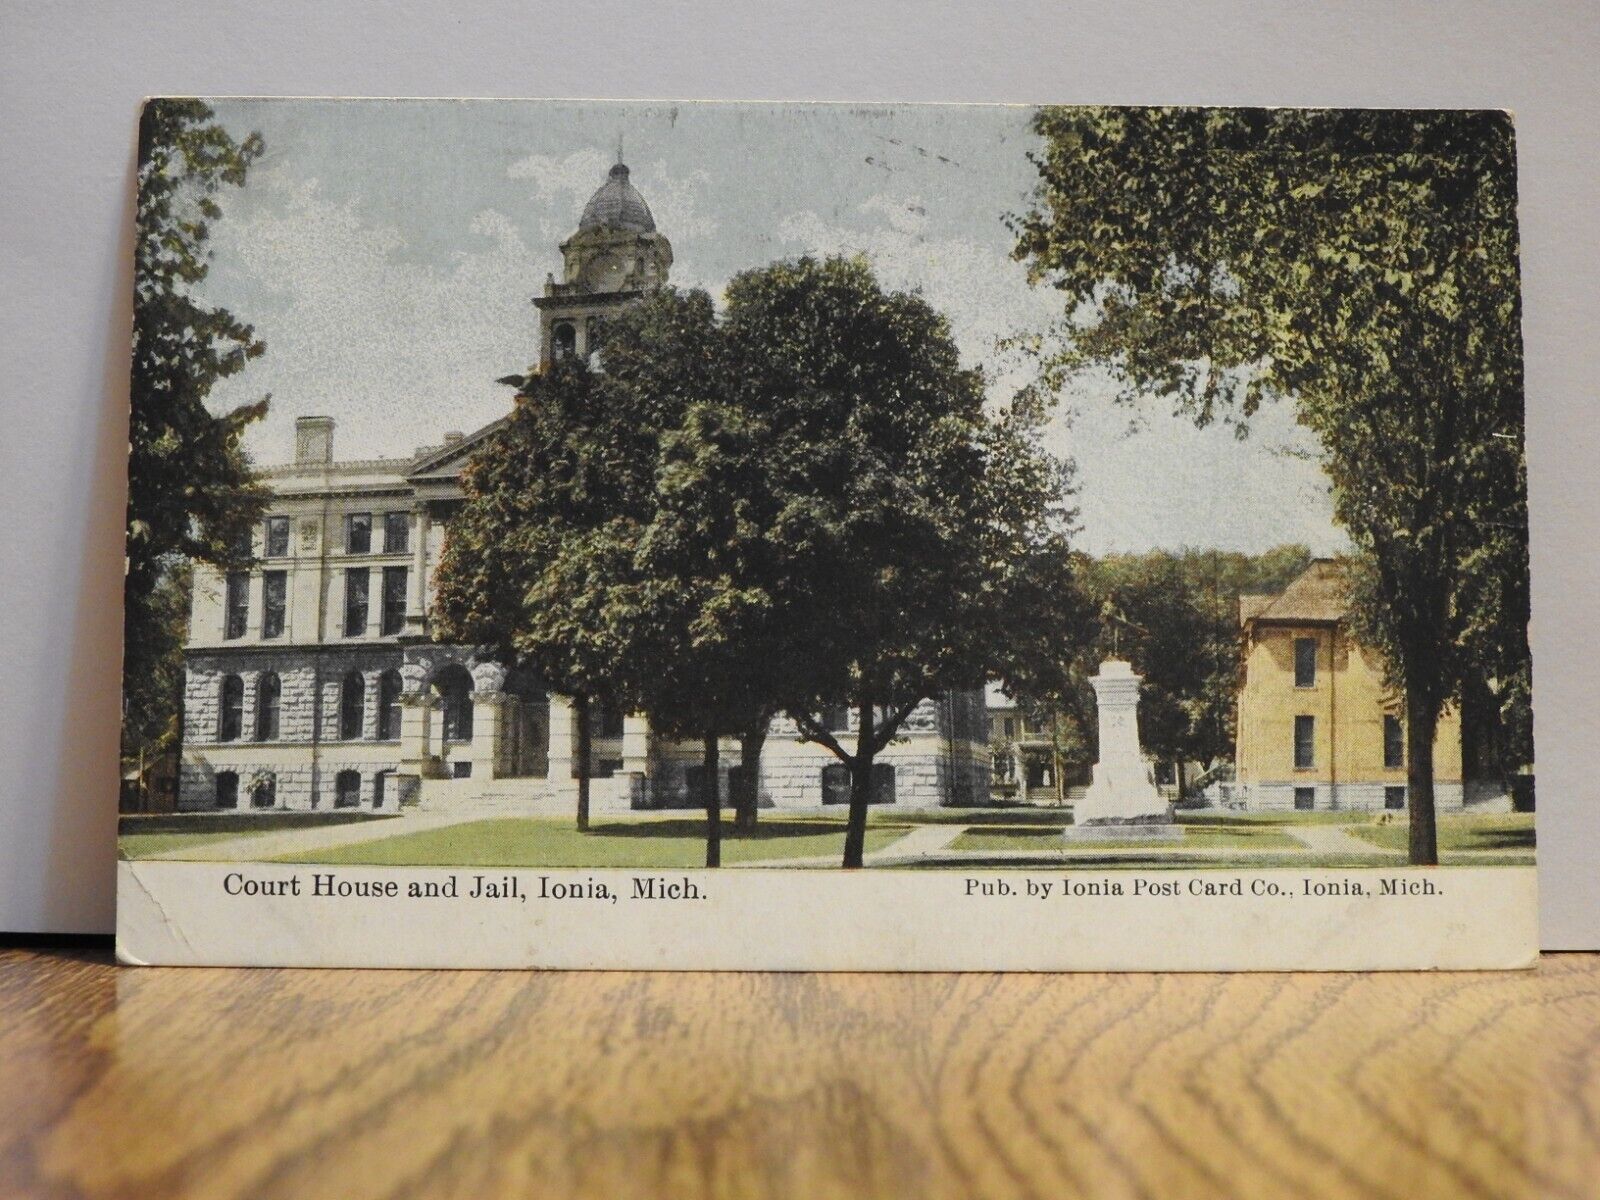 Court House and Jail Ionia, Michigan VTG Lithograph Post Card Posted 1911